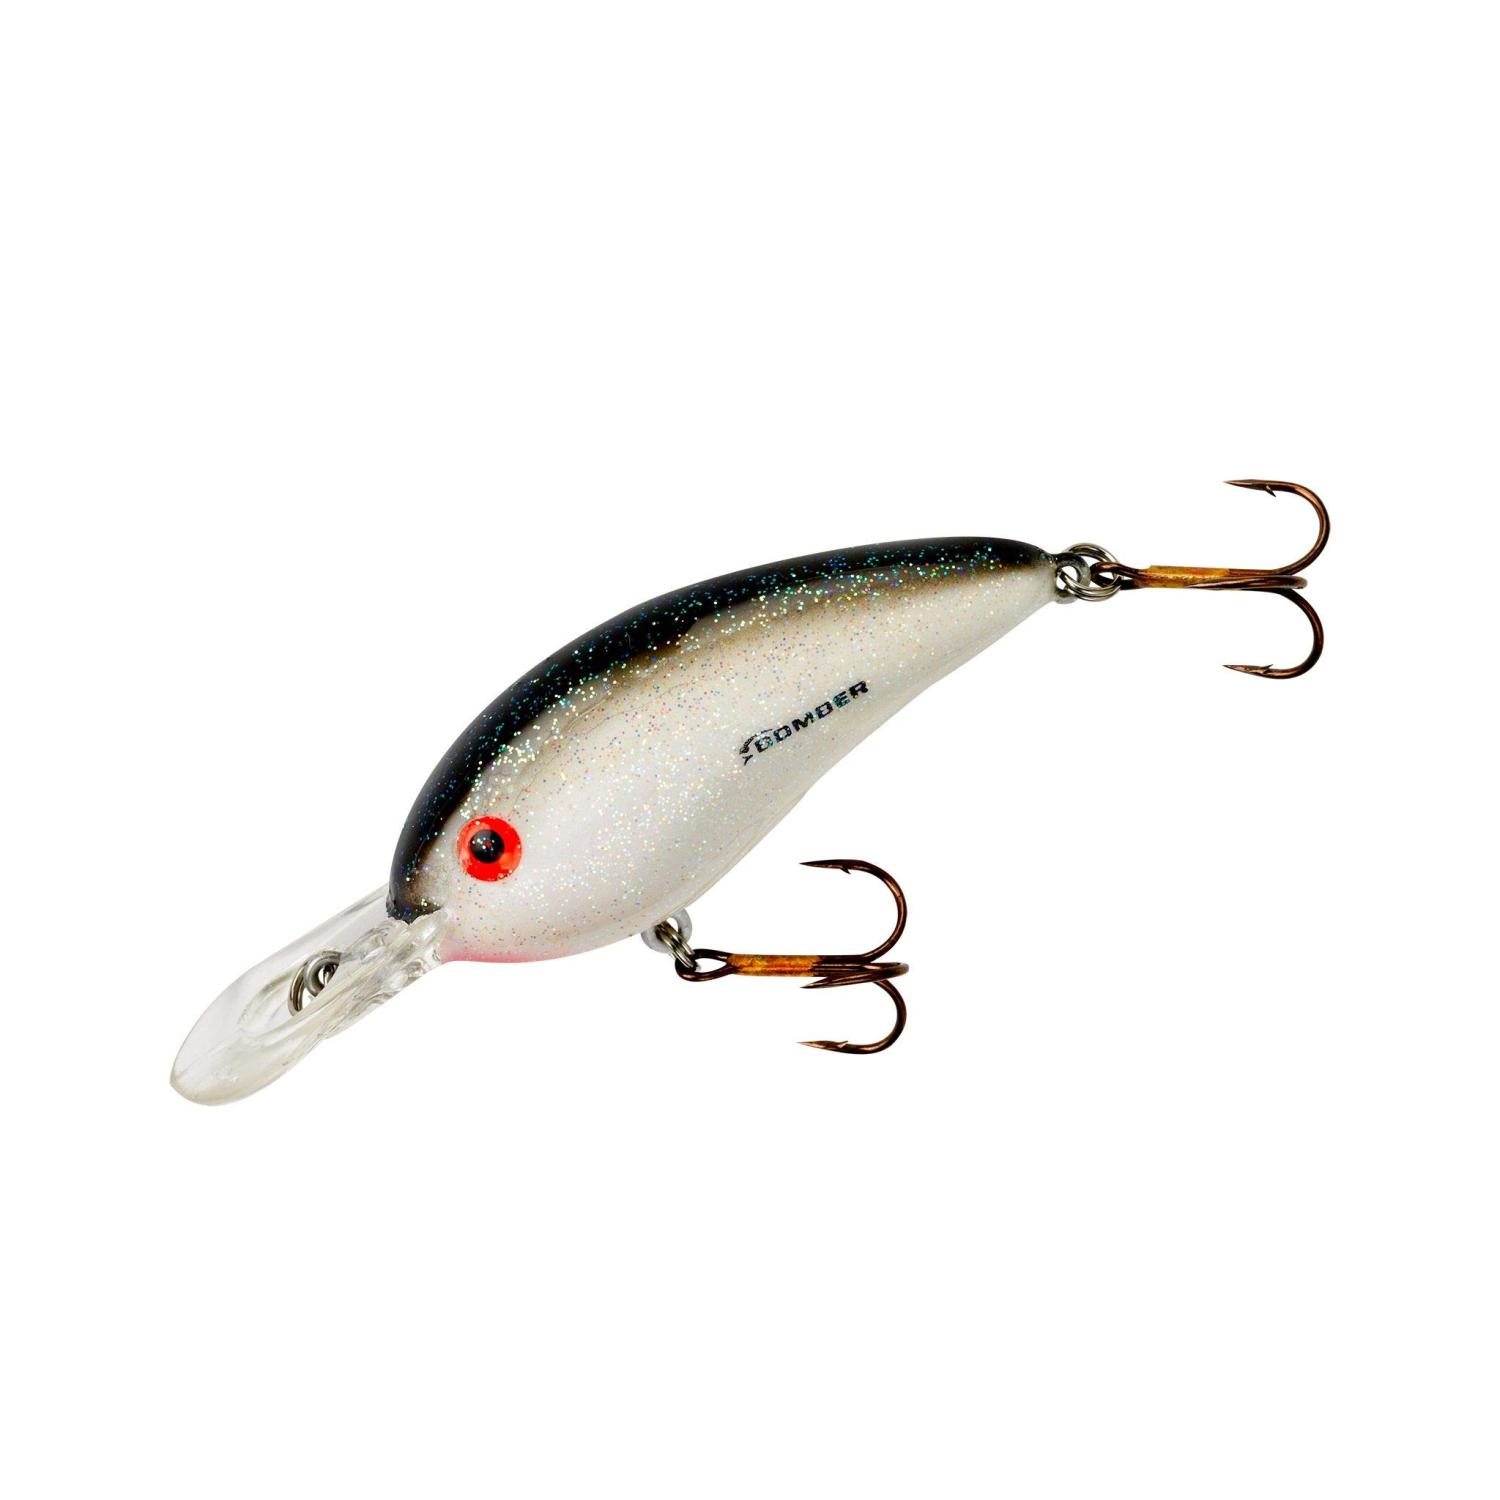  Bomber Fat Free Fingerling Fishing Lure (Citrus Sparkle, 2  3/8-Inch, 6.09-cm) : Fishing Topwater Lures And Crankbaits : Sports &  Outdoors